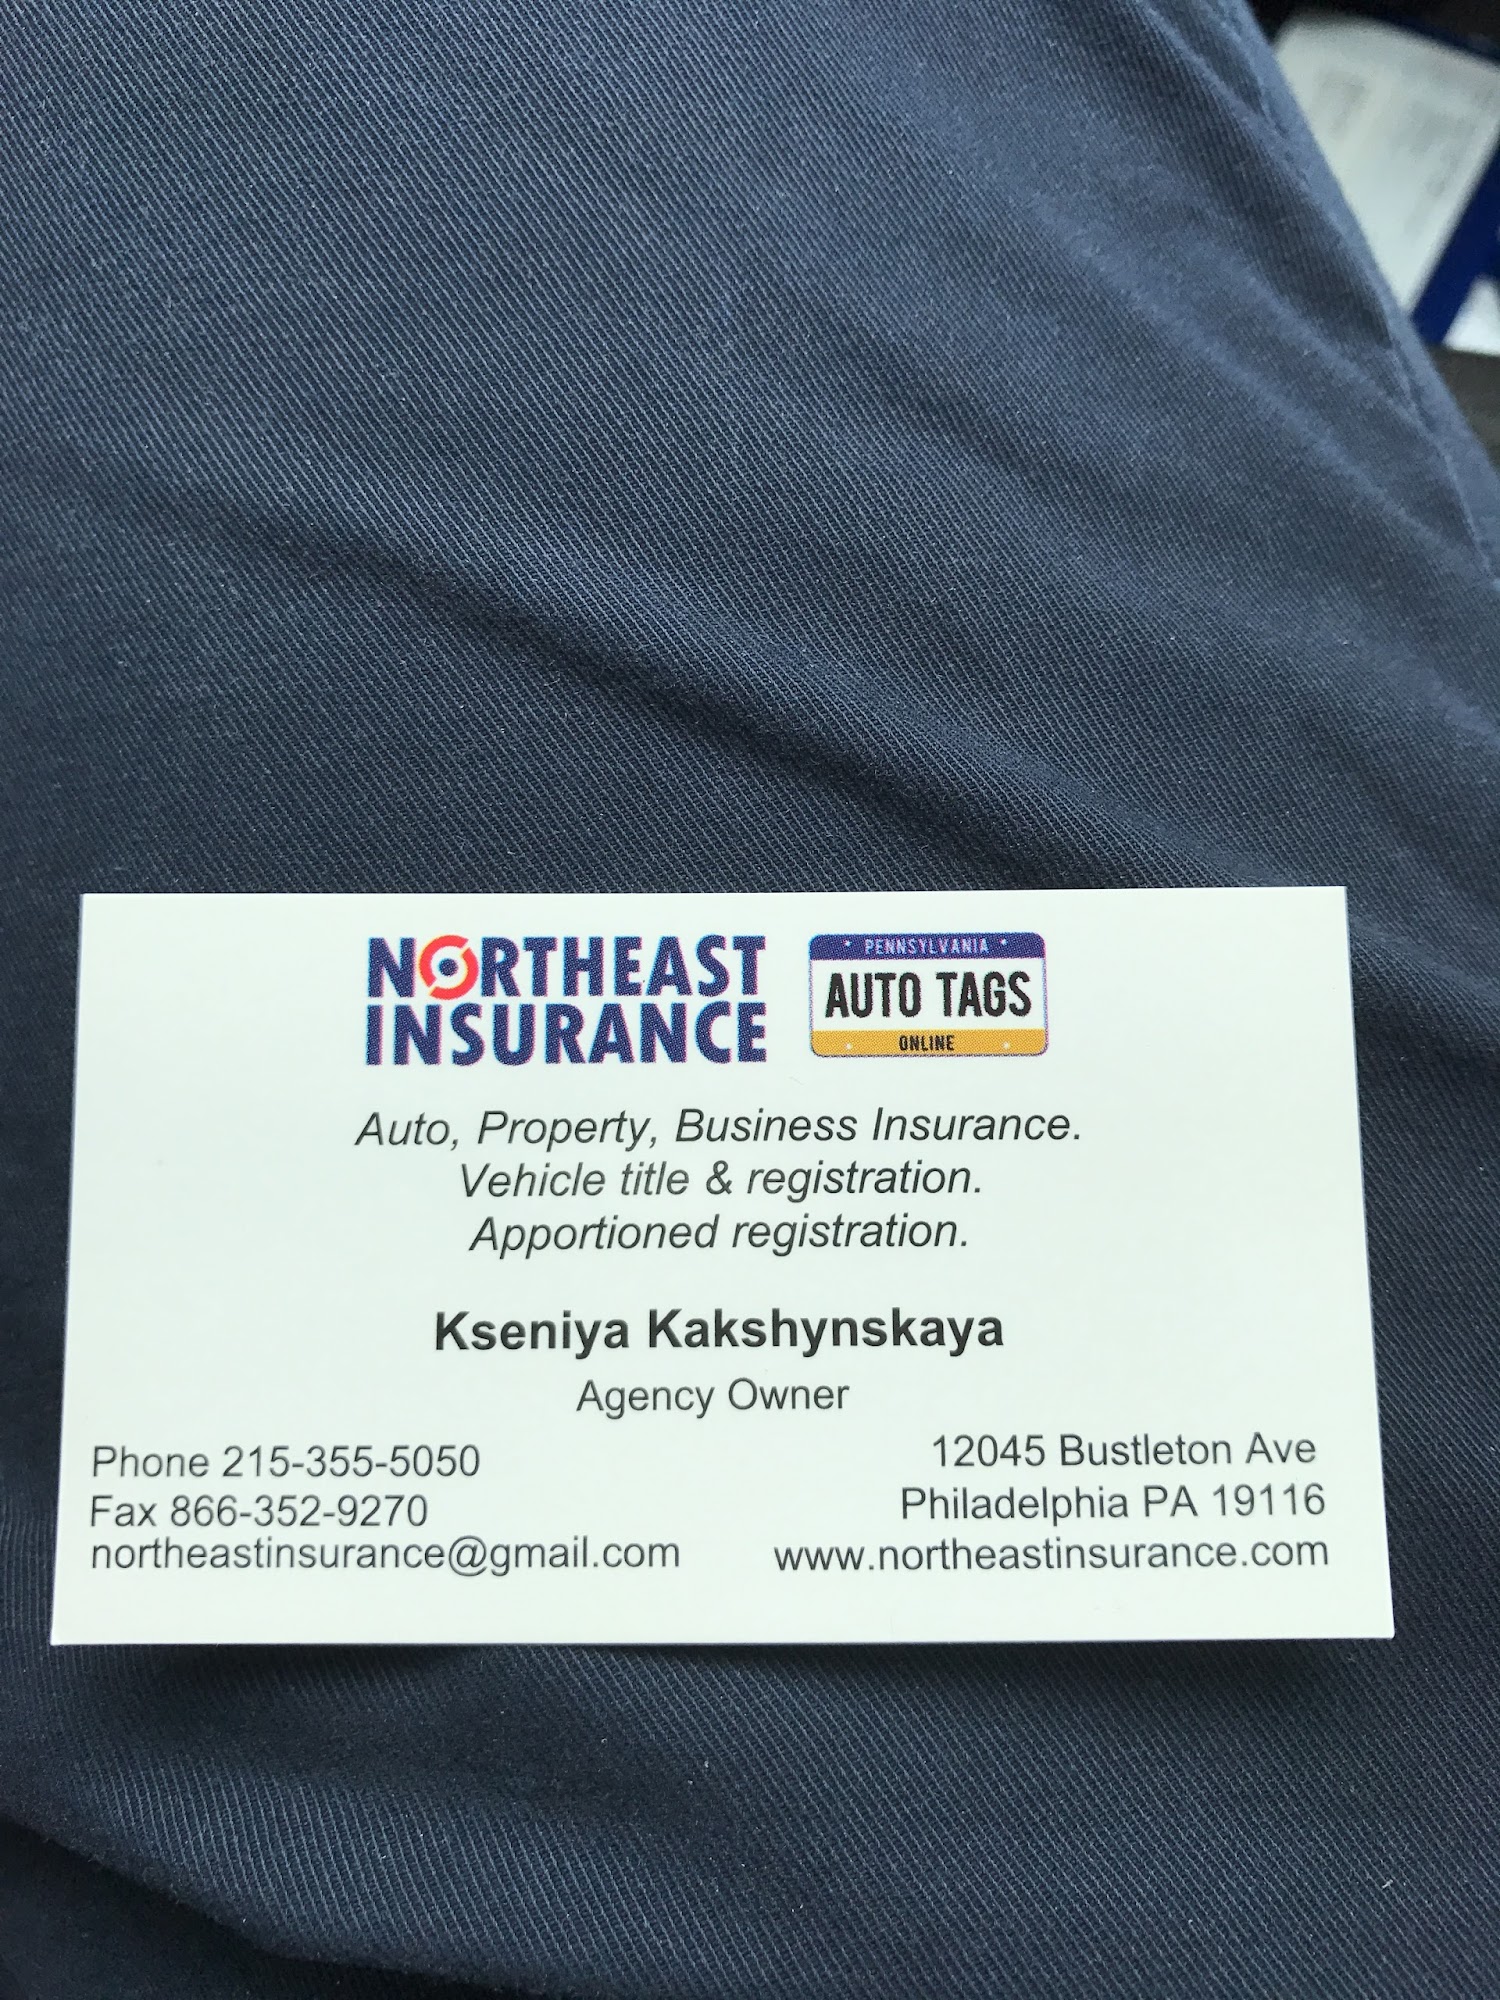 Northeast Insurance and Auto Tags